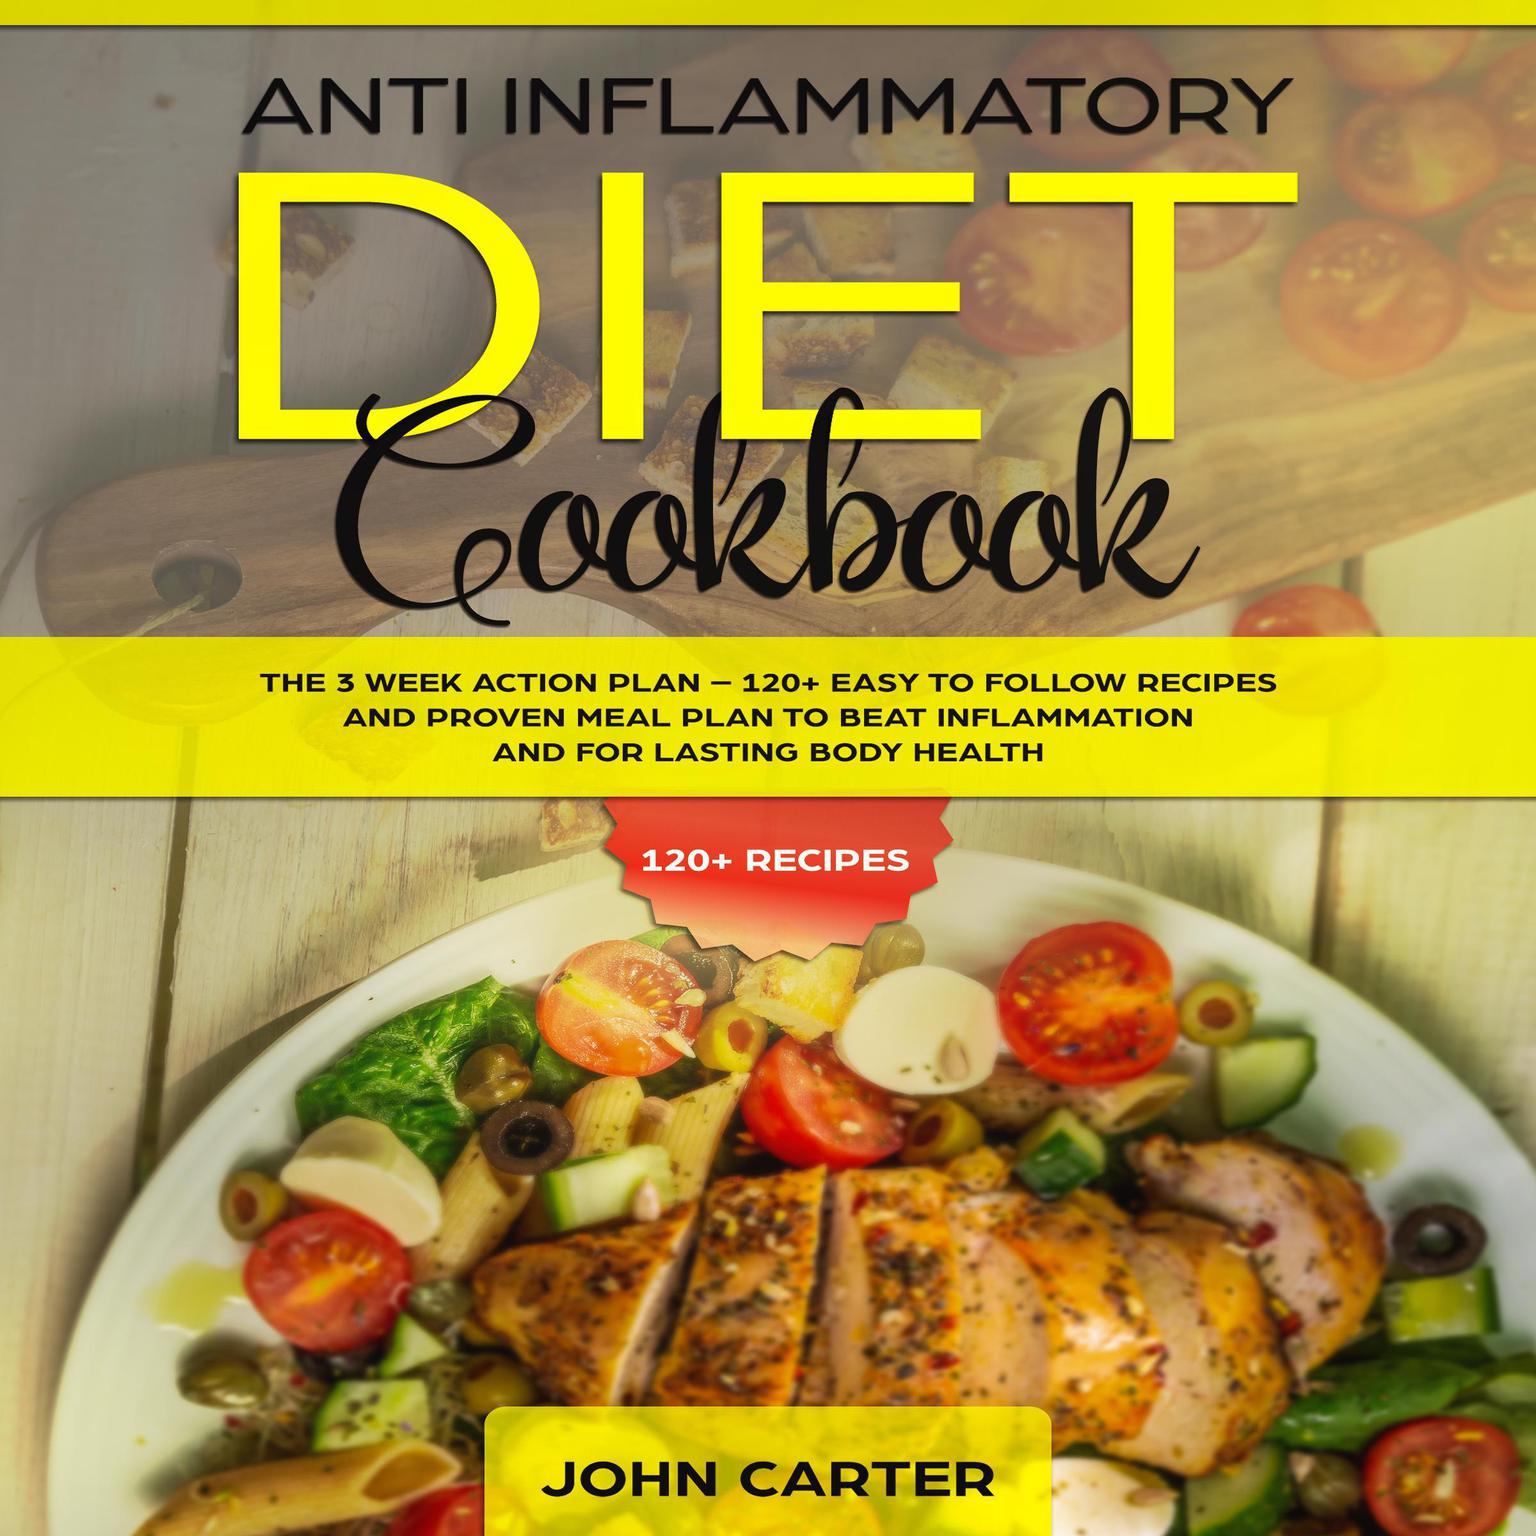 Anti Inflammatory Diet Cookbook: The 3 Week Action Plan—120+ Easy to Follow Recipes and Proven Meal Plan to Beat Inflammation and for Lasting Body Health Audiobook, by John Carter